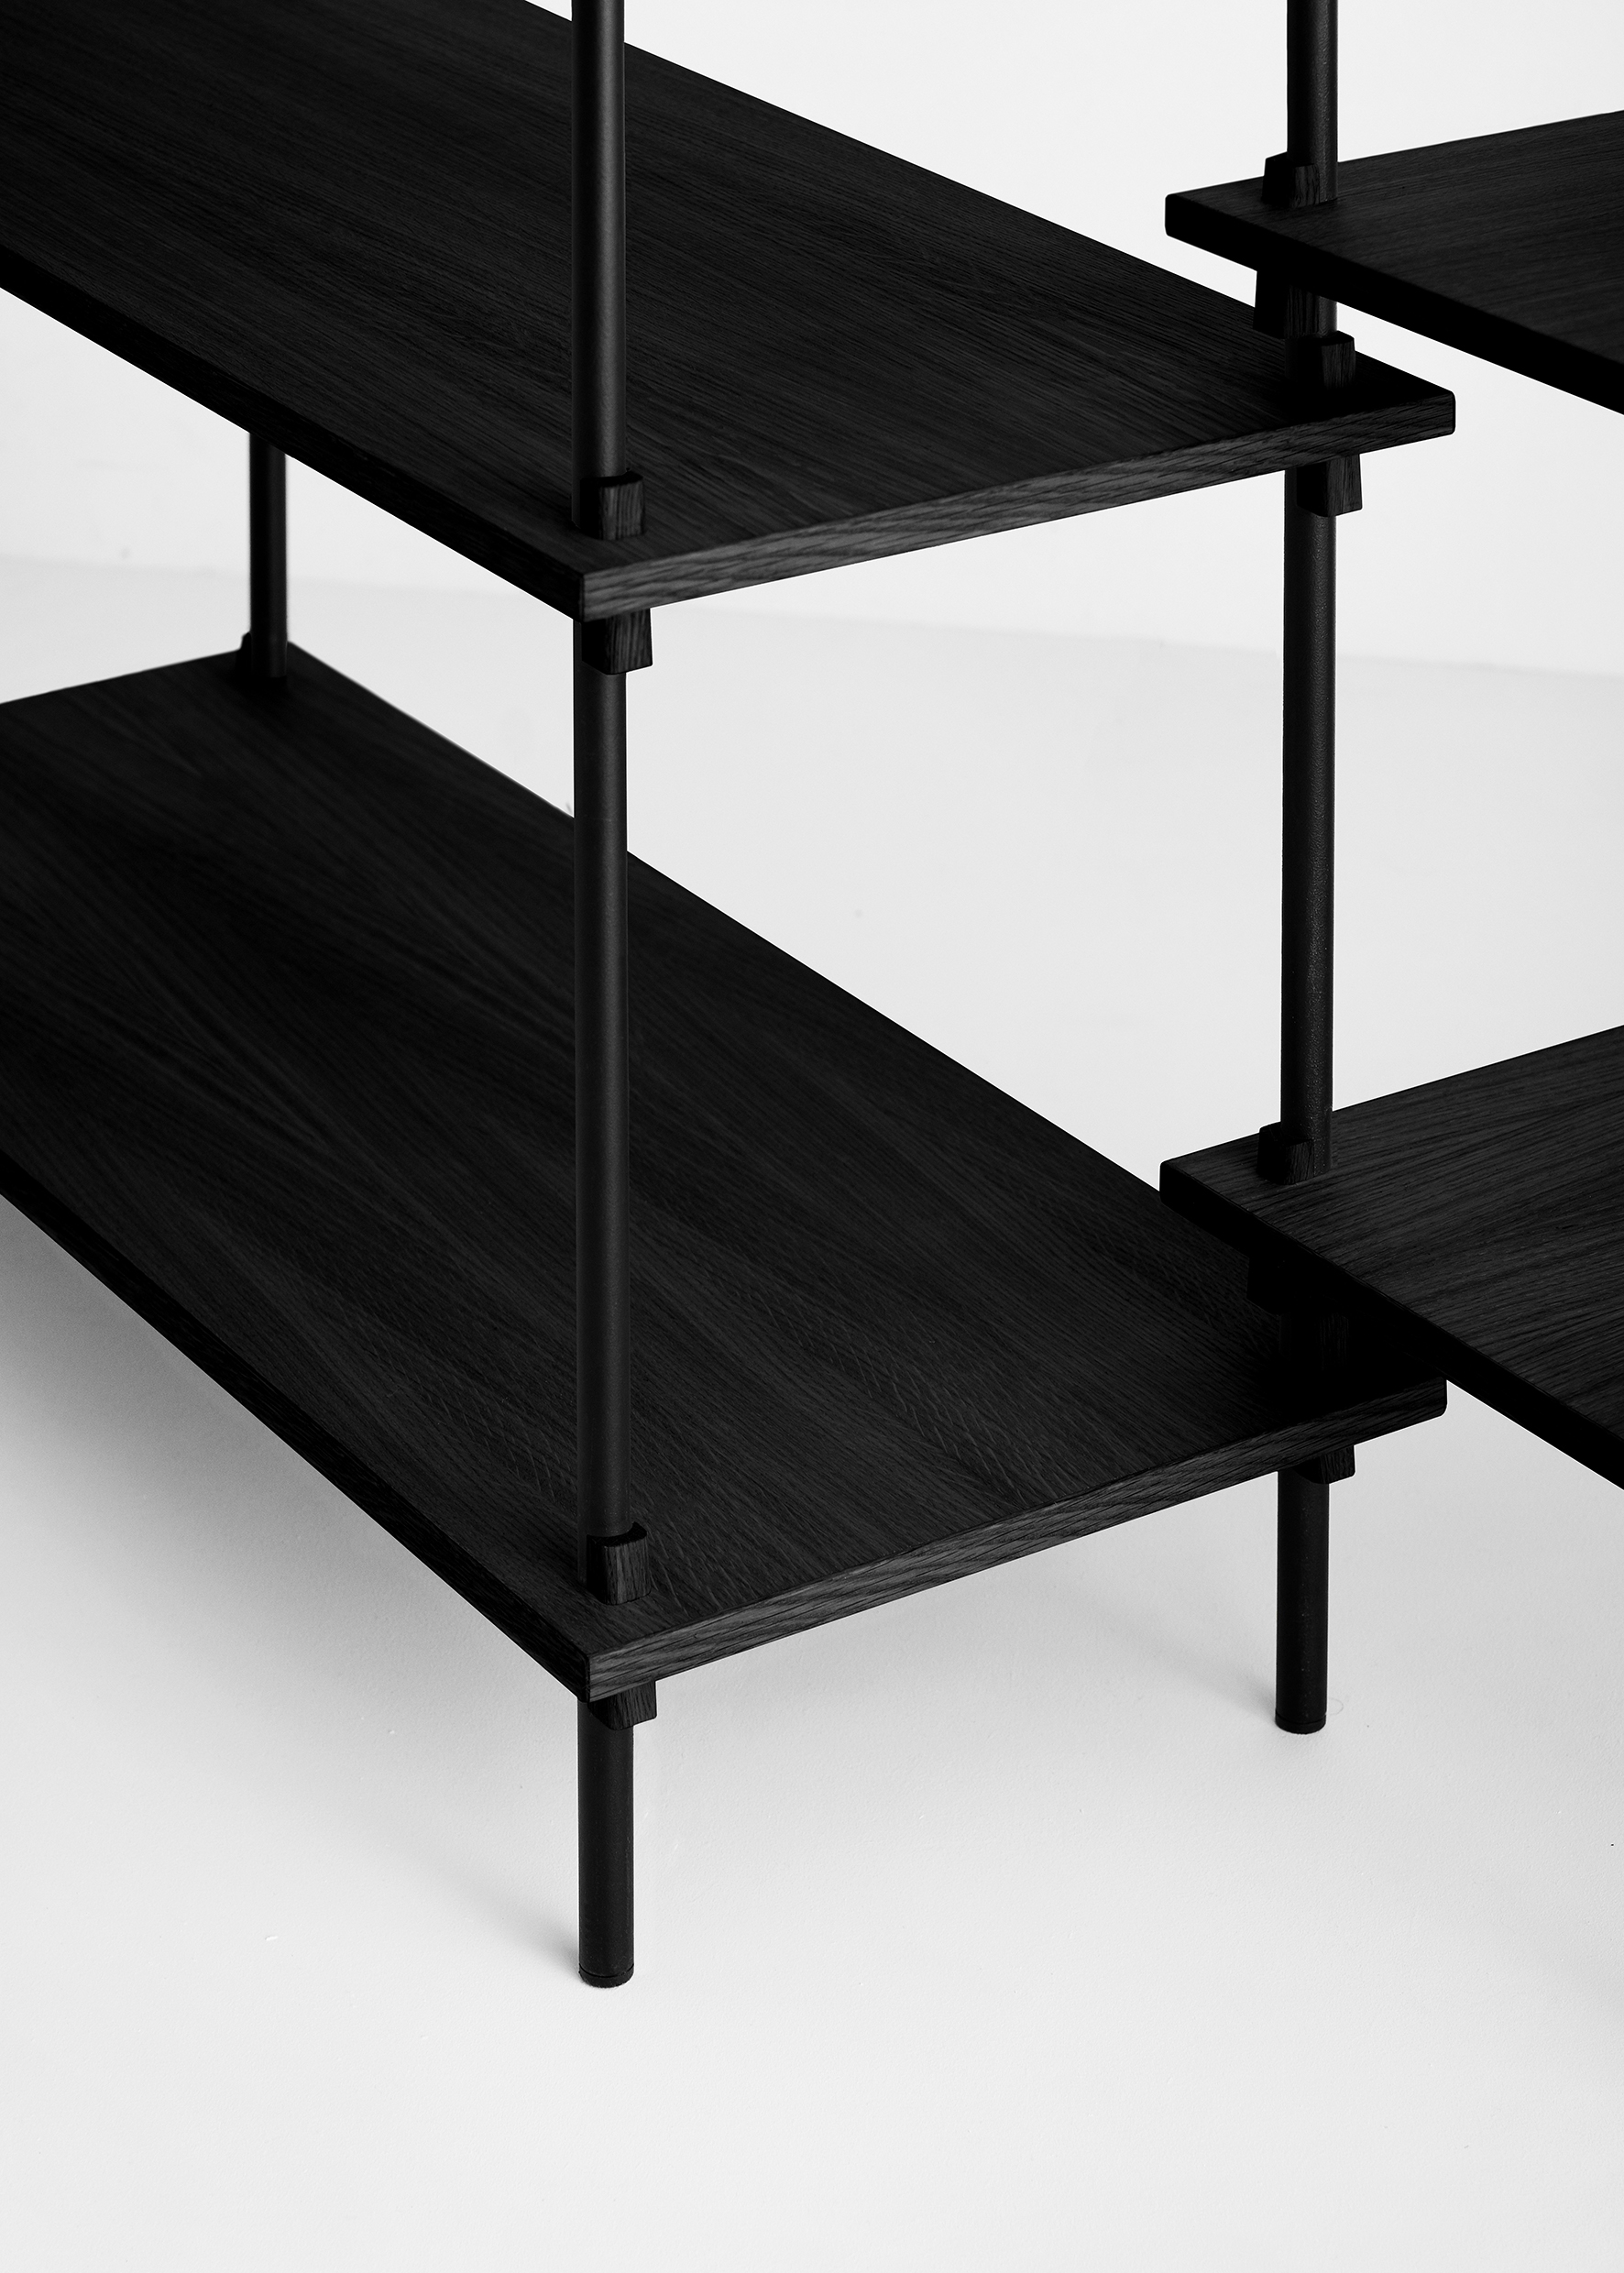 Moebe Shelving System tall double black